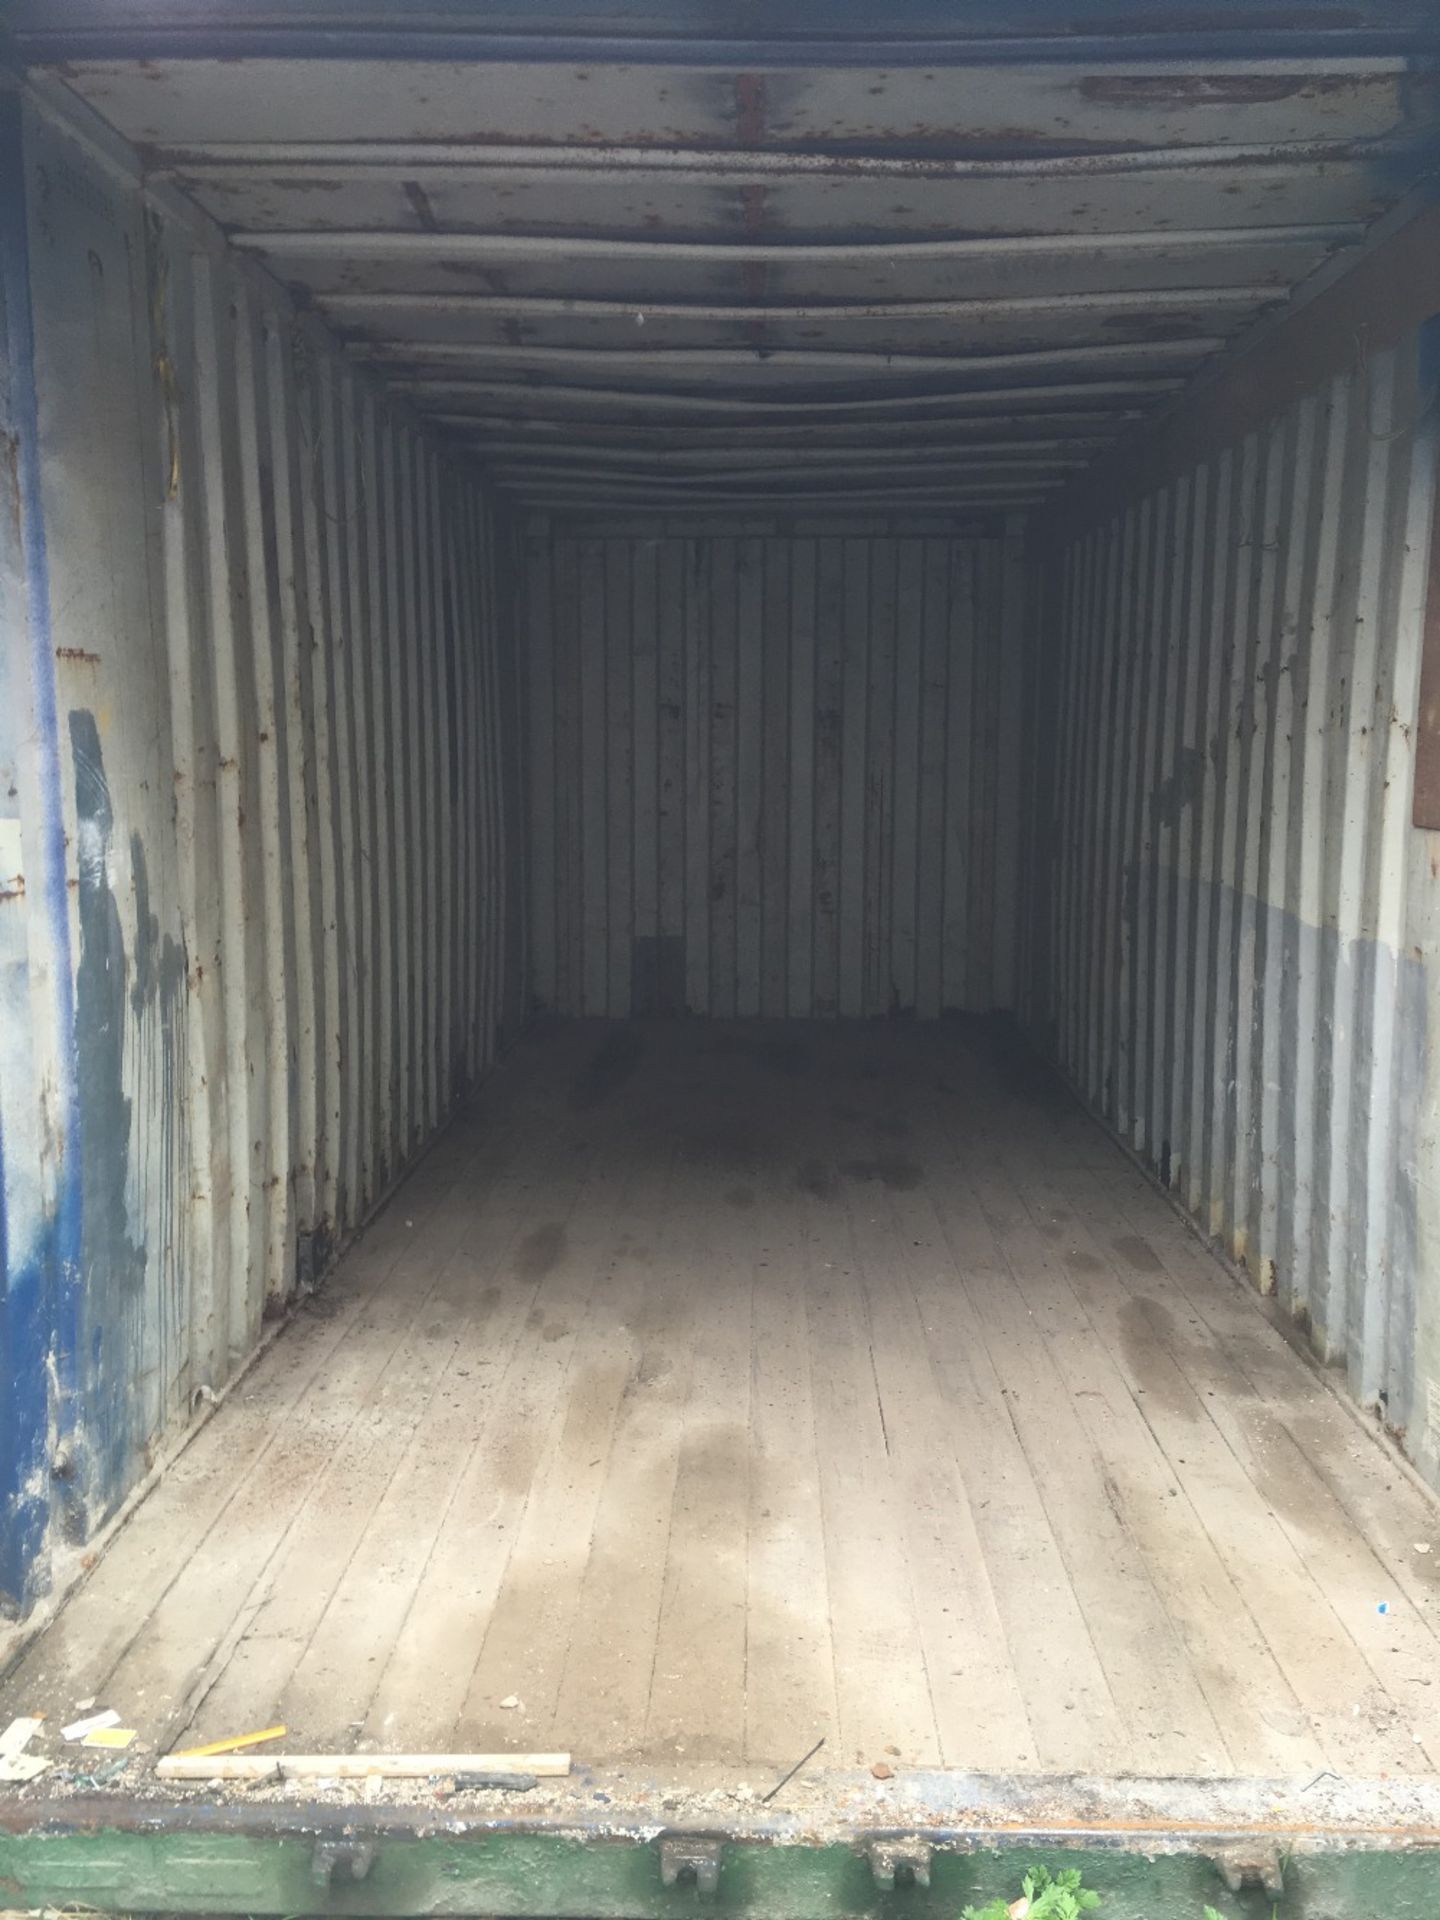 20 x 8 foot double door storage container with locking box A7 - Image 3 of 3